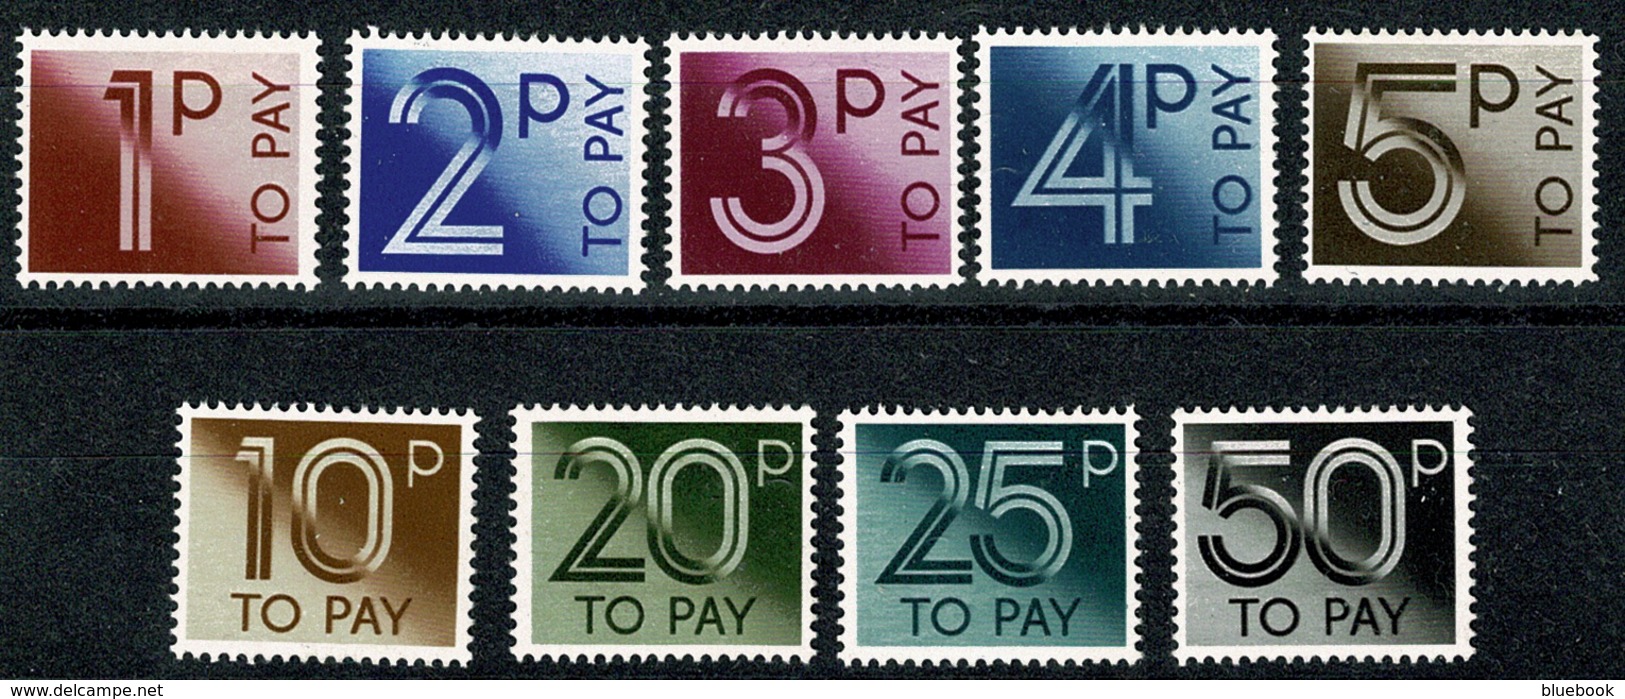 Ref 1292 - GB 1982 Postage Due Set Of Stamps - Mint - SG 90-101 - Postage Due